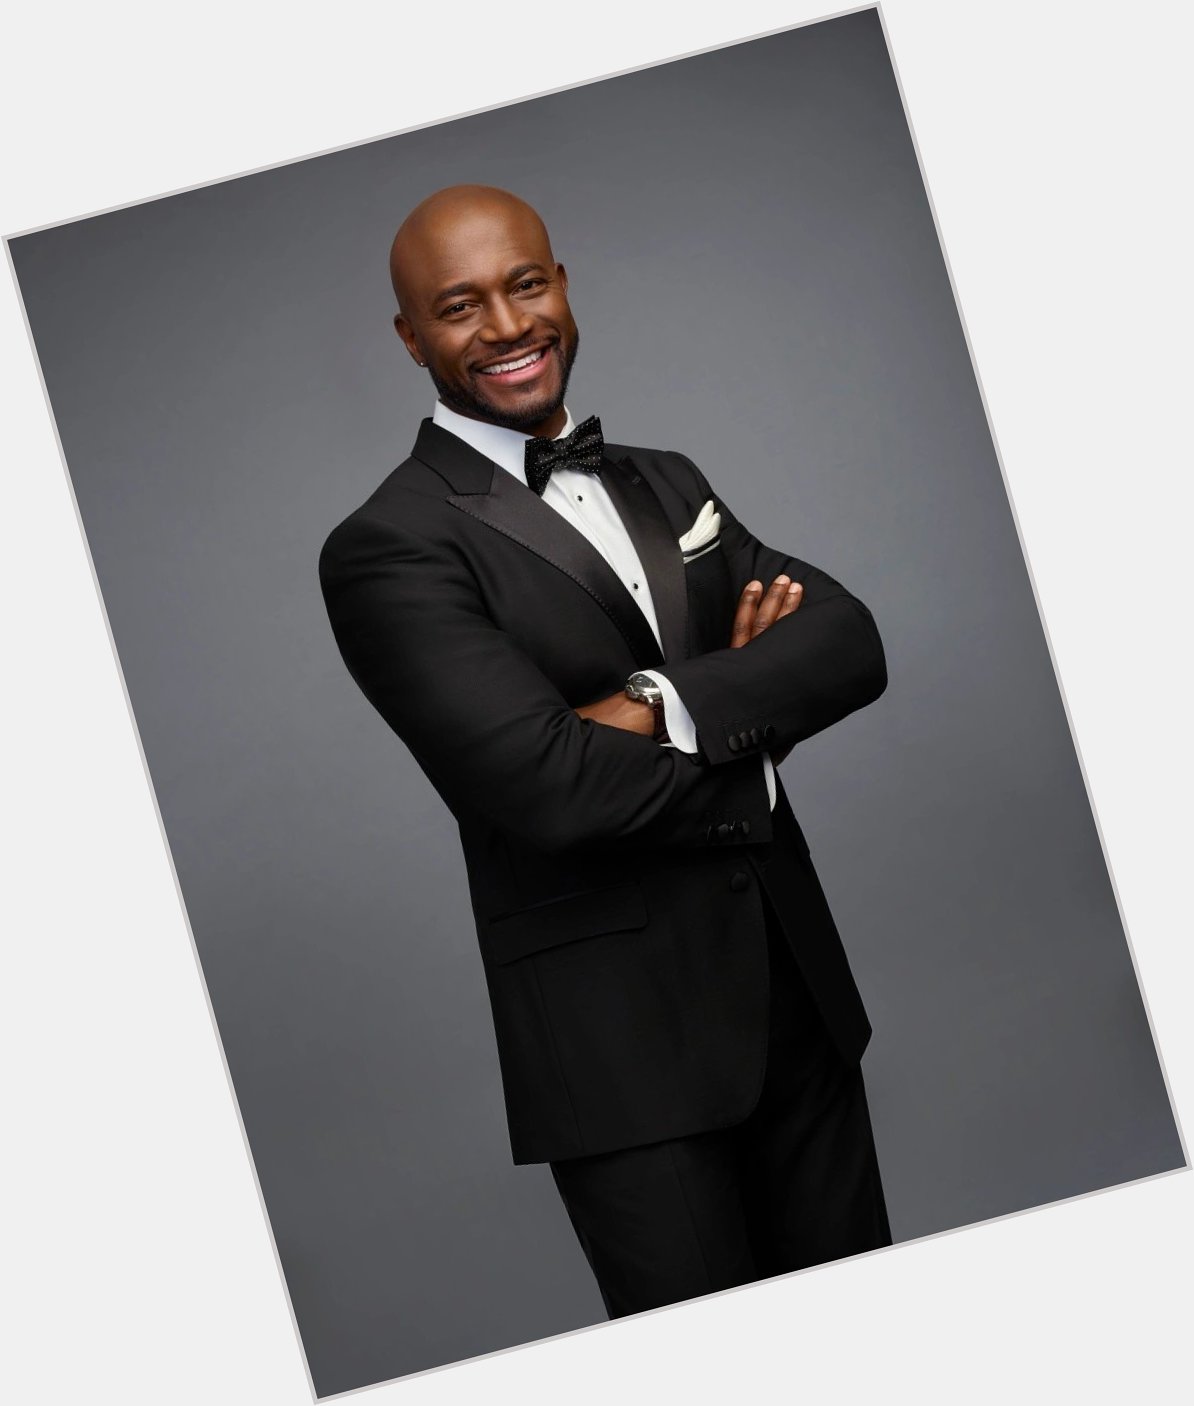 Happy Birthday Taye Diggs ... 
Thank You for Sharing your Gifts and L A U G H T E R 
with the World. 